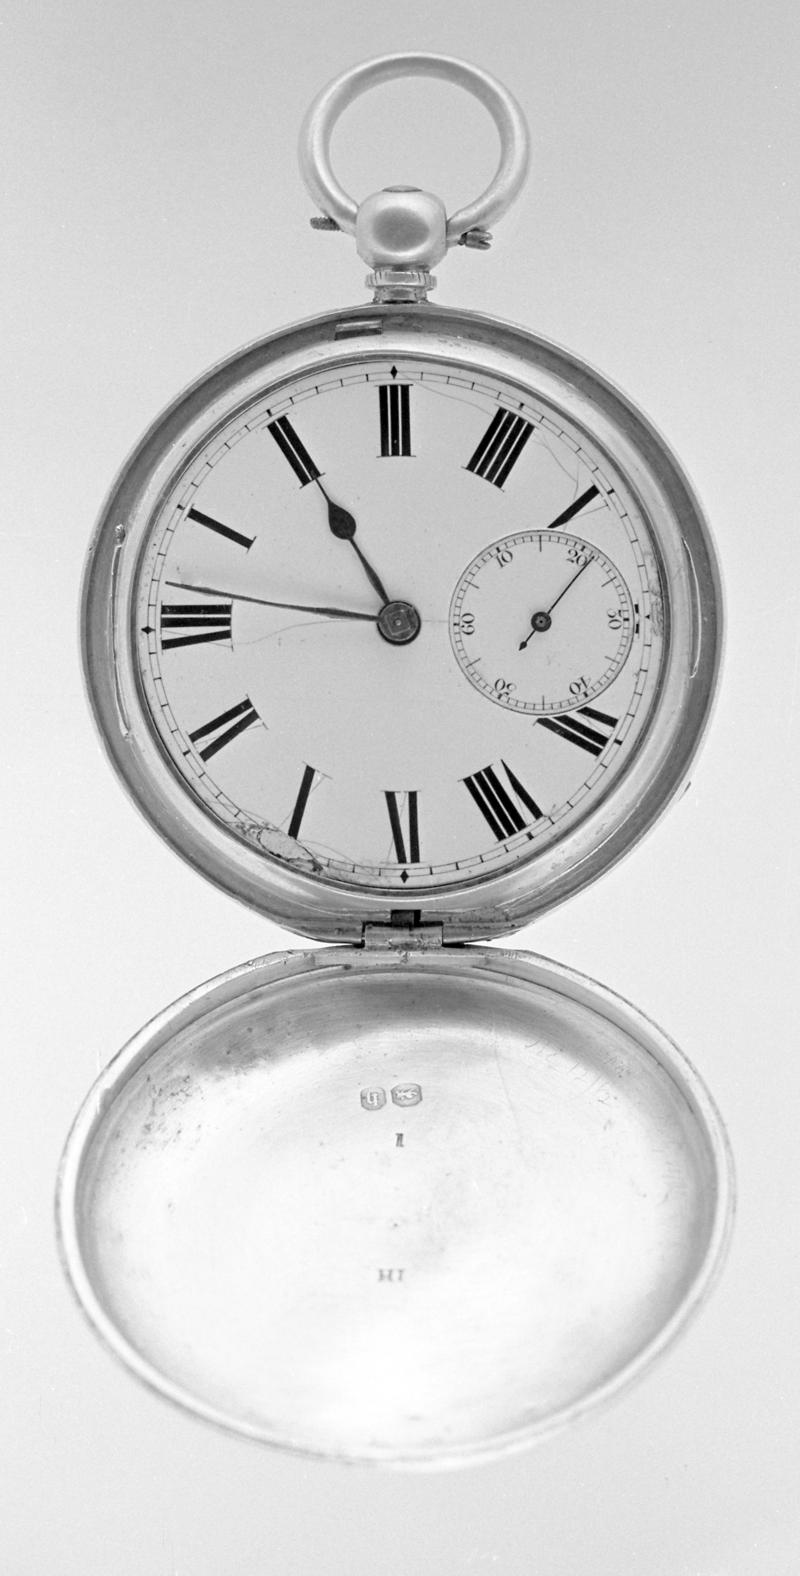 Pocket watch with old English lever and fusee movement in full hunter case, by Robert Parry, Llanrwst. 1863.